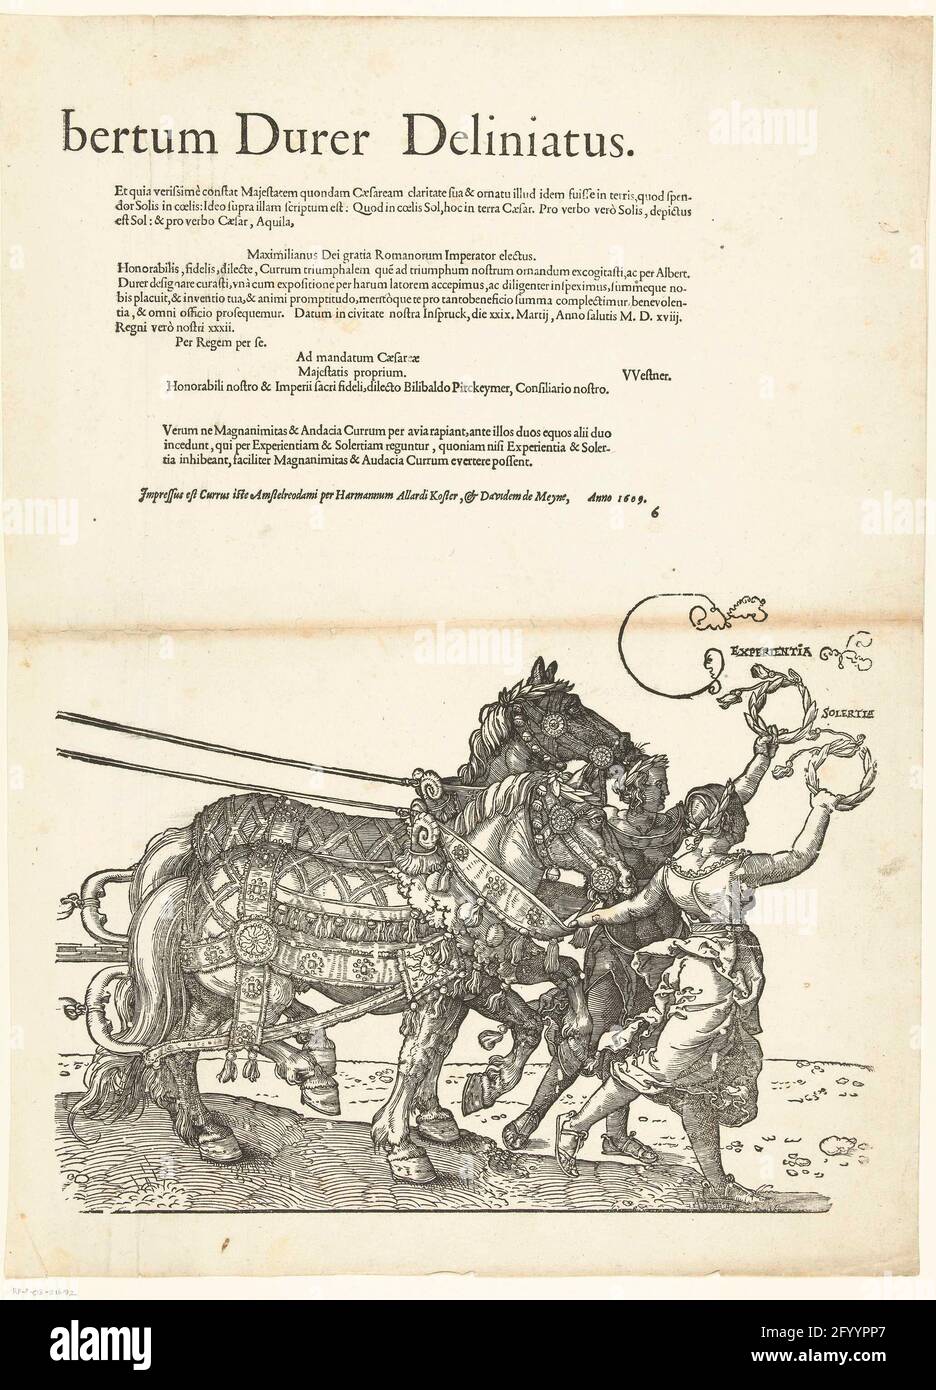 Triumphar from Emperor Maximilian I (eighth magazine), 1519; Copies to Dürers Triomfvag for Emperor Maximiliaan I, published in Amsterdam in 1609 by H. A. Koster and D. de Meyn; Triumphalis HIC Currus Ad Honorem Invictiss. AC Gloriosissimi Principis D. Maximiliani Caesis Semper Augusti Conconsatus Est, AC per Albertum Durer Deliniatus. The large triomfvag in honor of Emperor Maximiliaan I at his death on January 12, 1519. Eighth magazine with the sixth span horses with experientia and Soprano. Copy to the original of Albrecht Dürer from 1522. Stock Photo